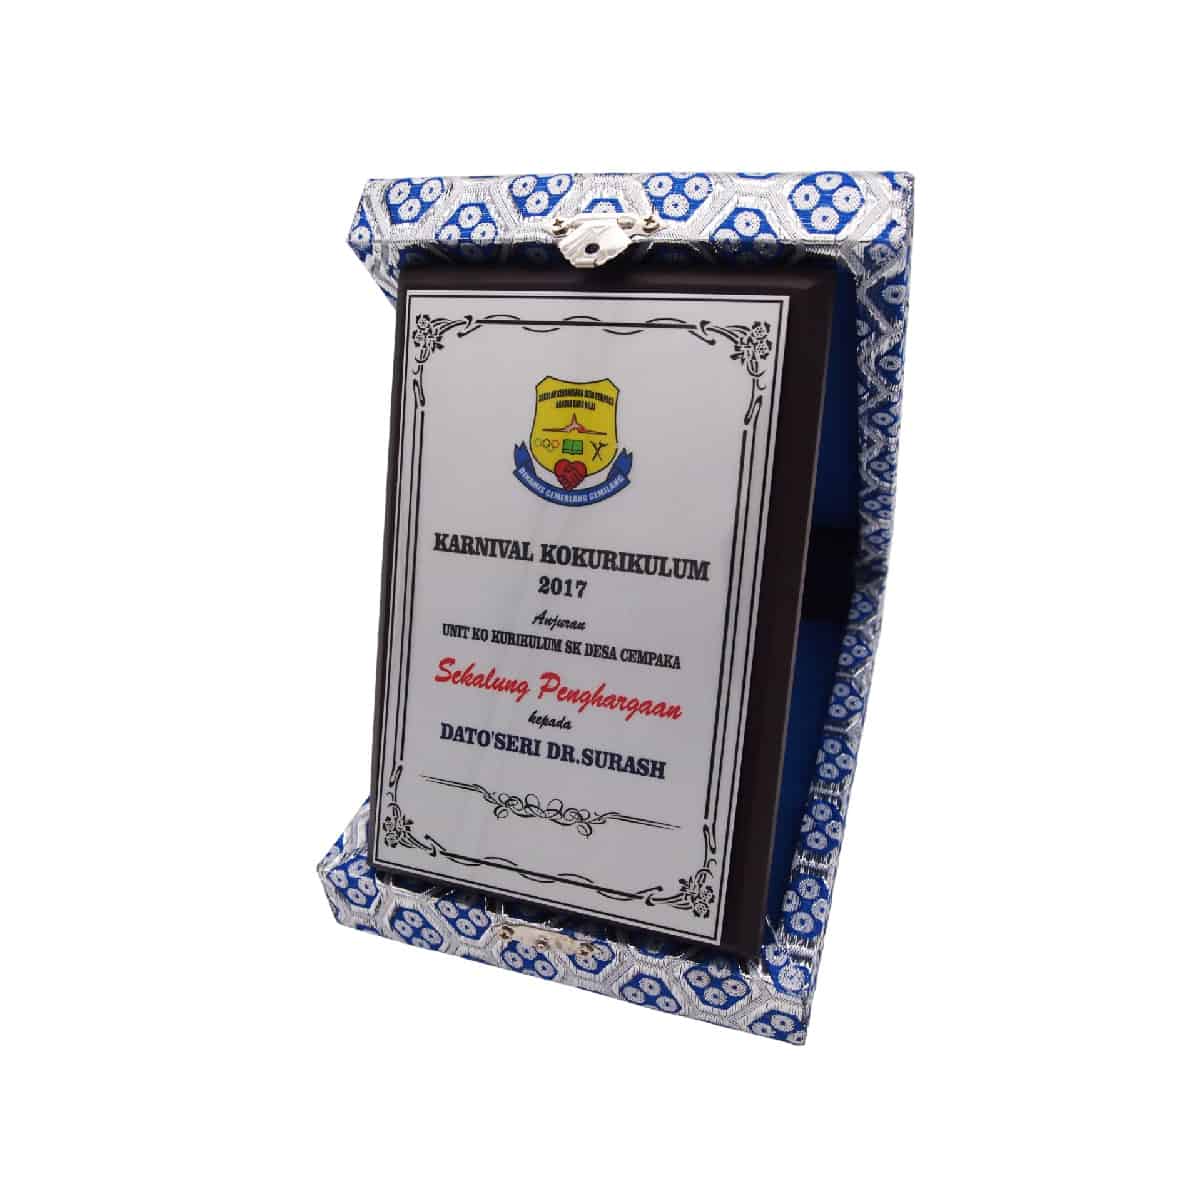 Songket Plaque at Clazz Trophy Malaysia | #1 Rated Trophy Supplier in Malaysia